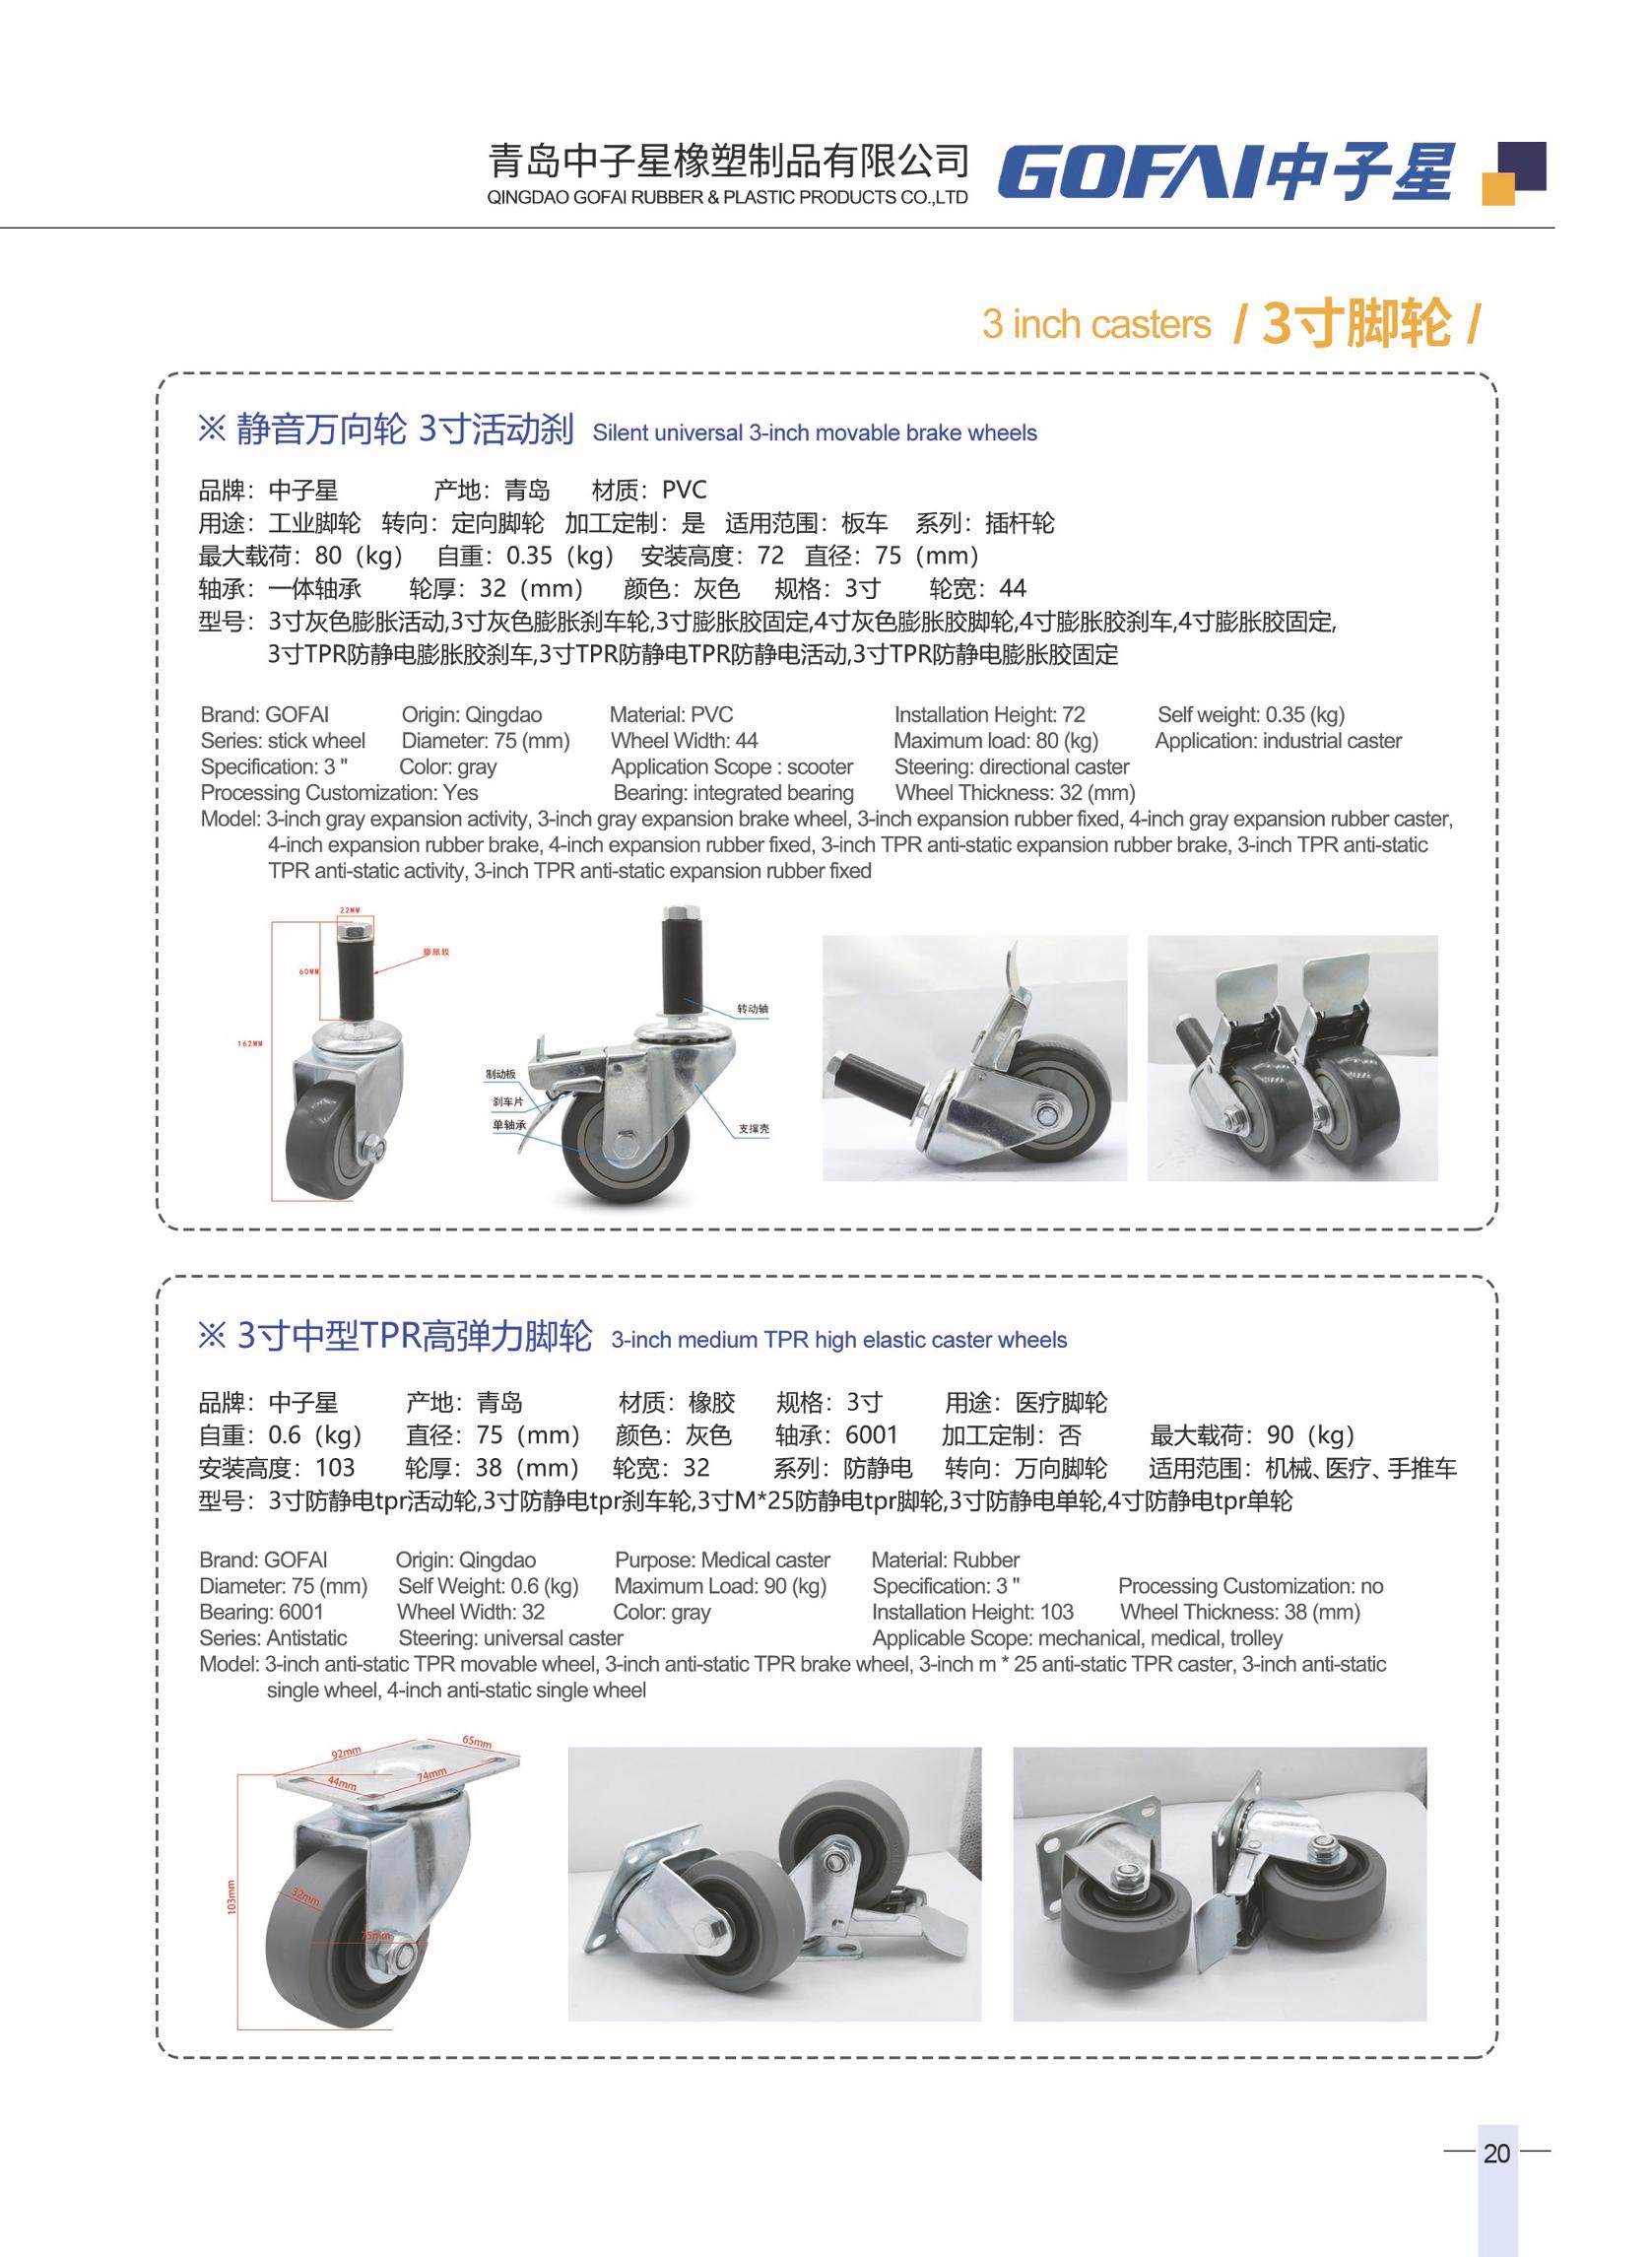 Gofai based foot cups and caster wheels_22.jpg